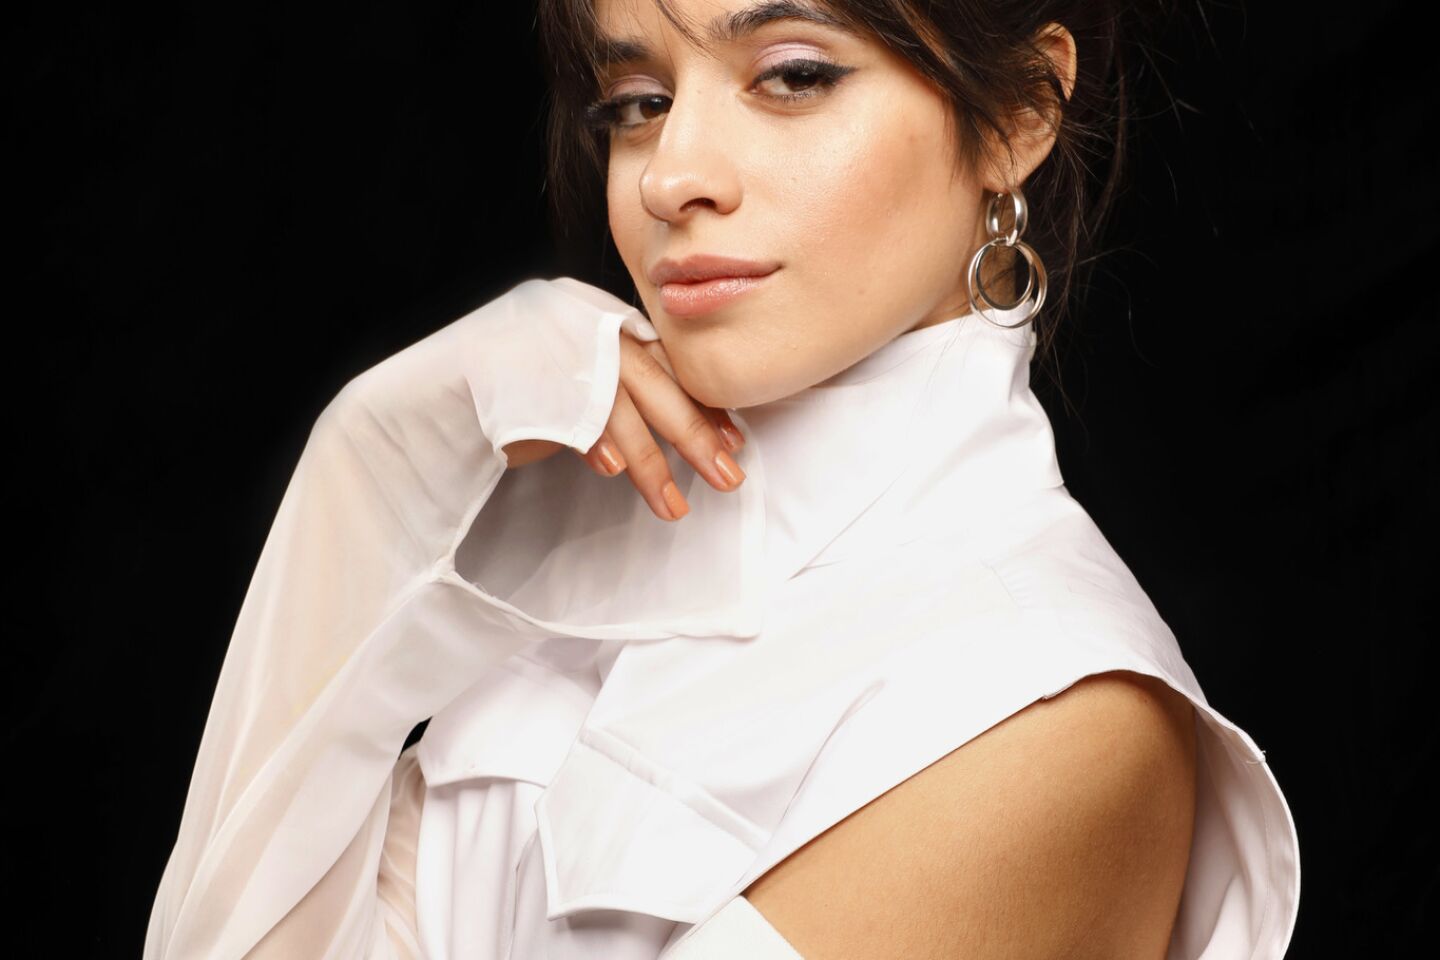 Celebrity portraits by The Times | Camila Cabello